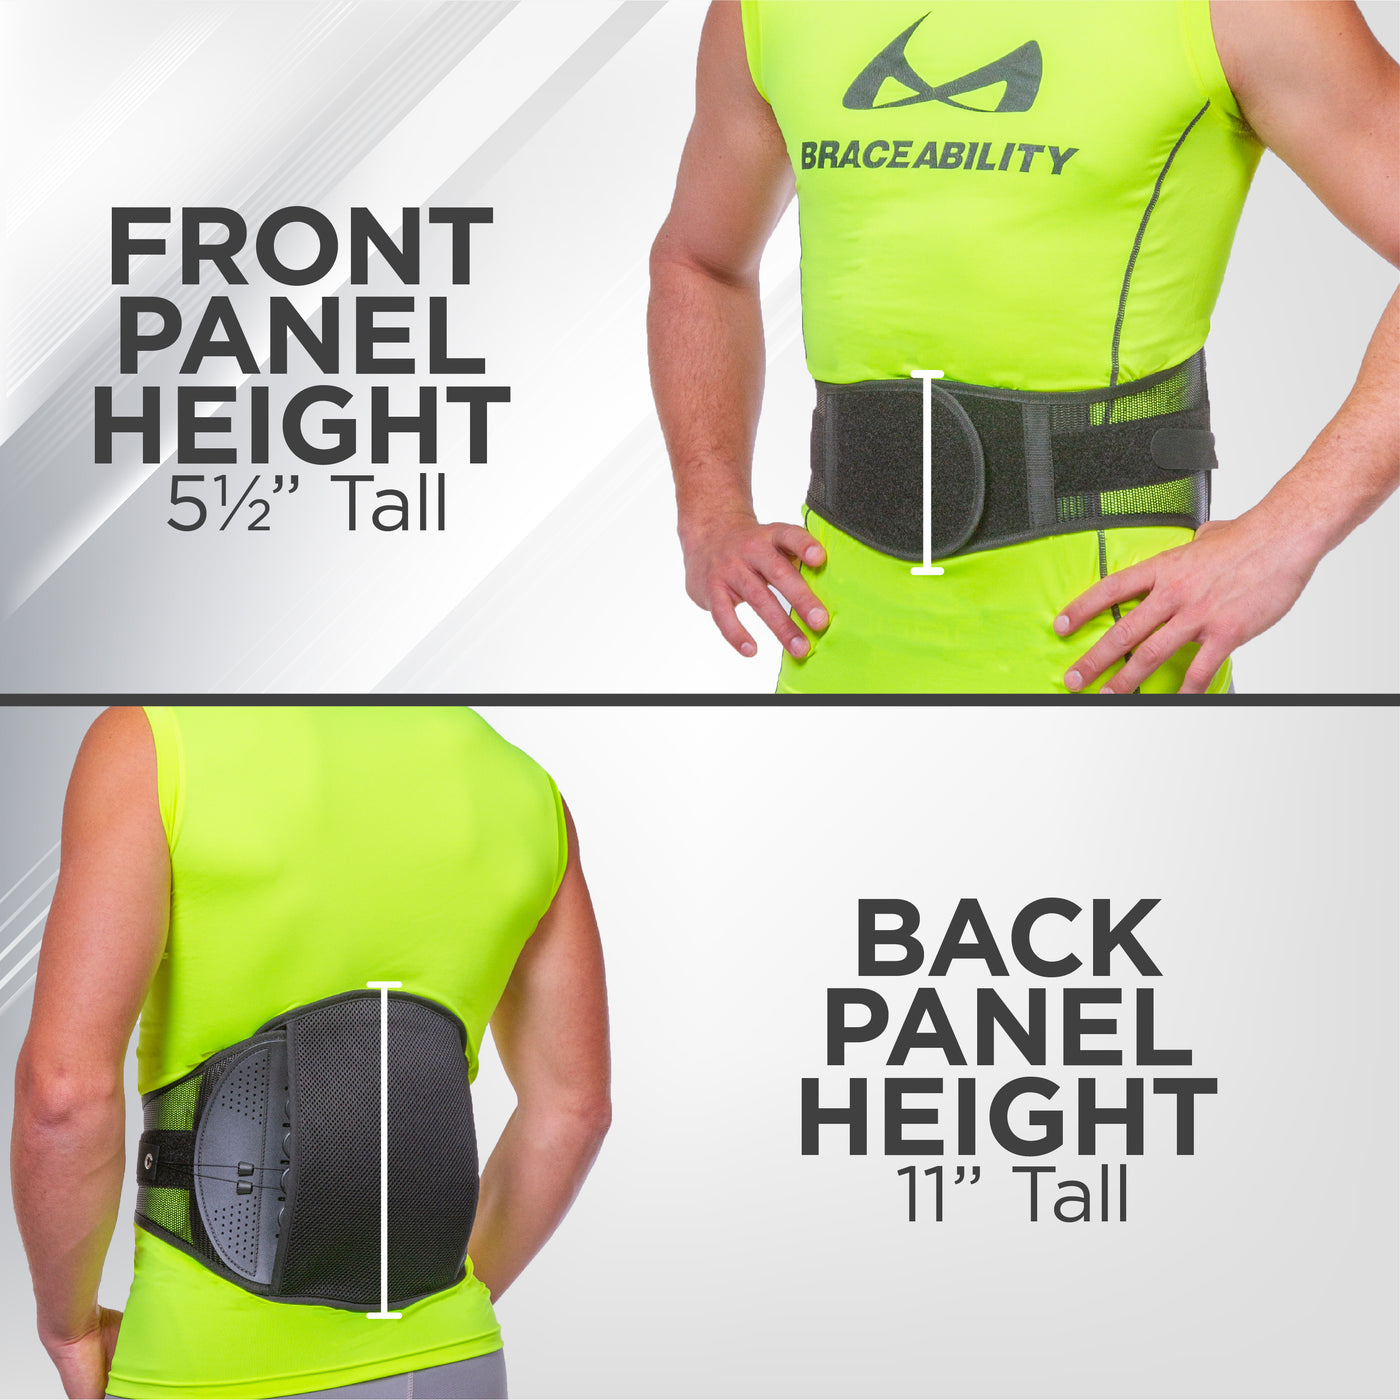 The eleven inch tall spondylolysis lumbar treatment brace compresses your lower back